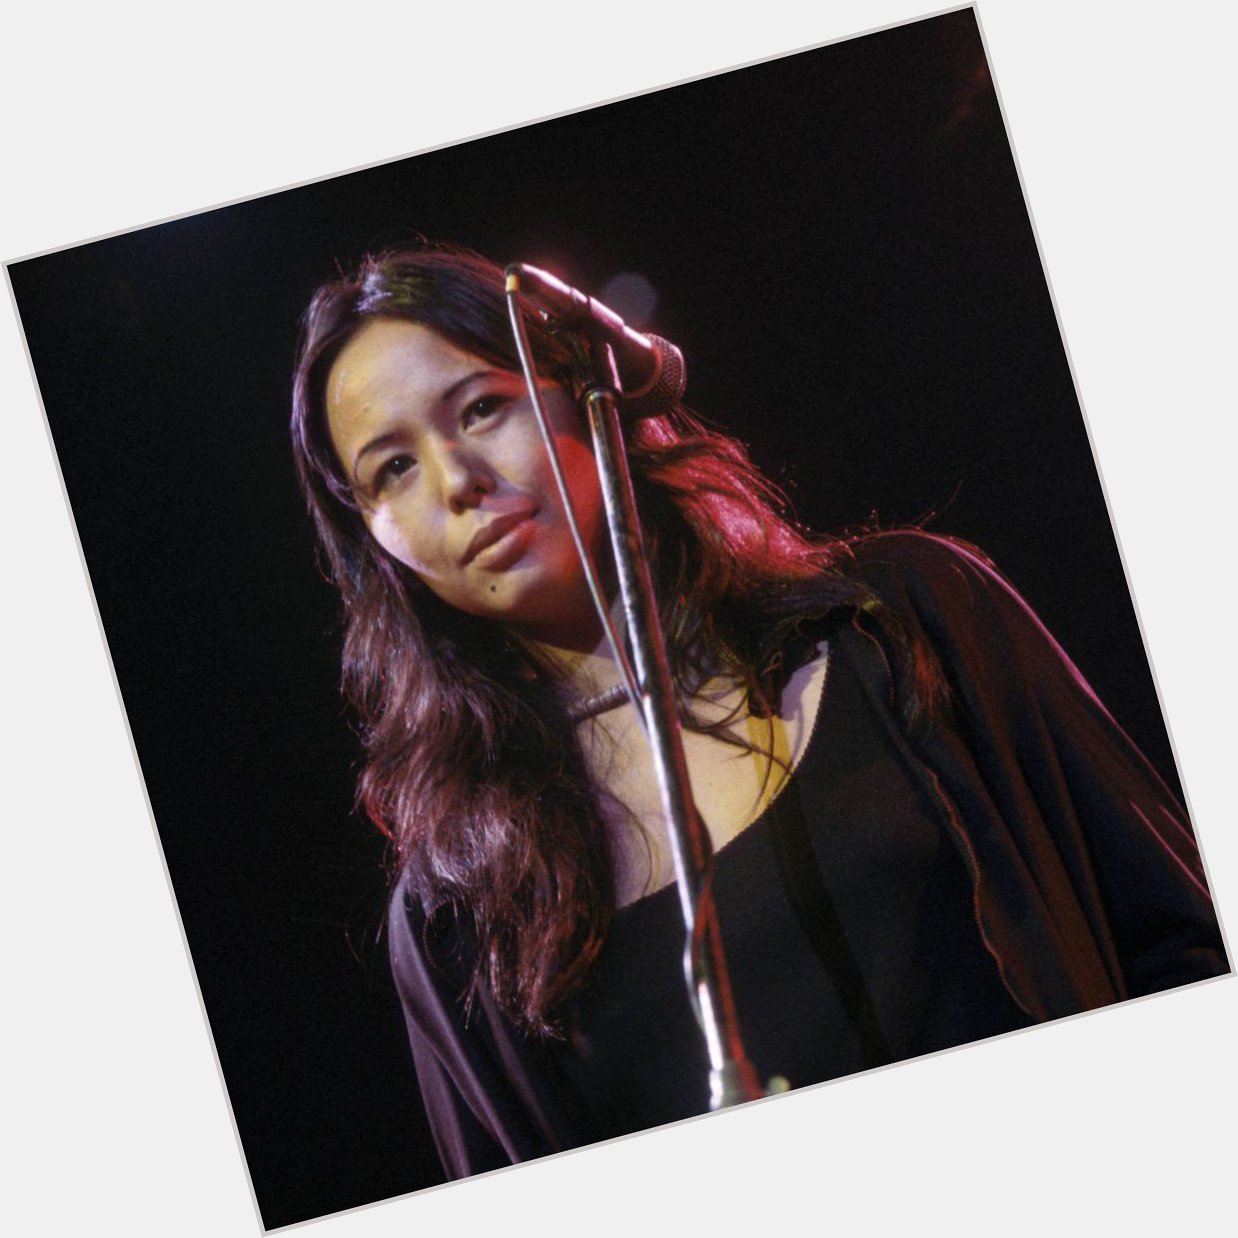 Yvonne Elliman If I can\t have you 1977 16:9  via Happy Birthday Yvonne 